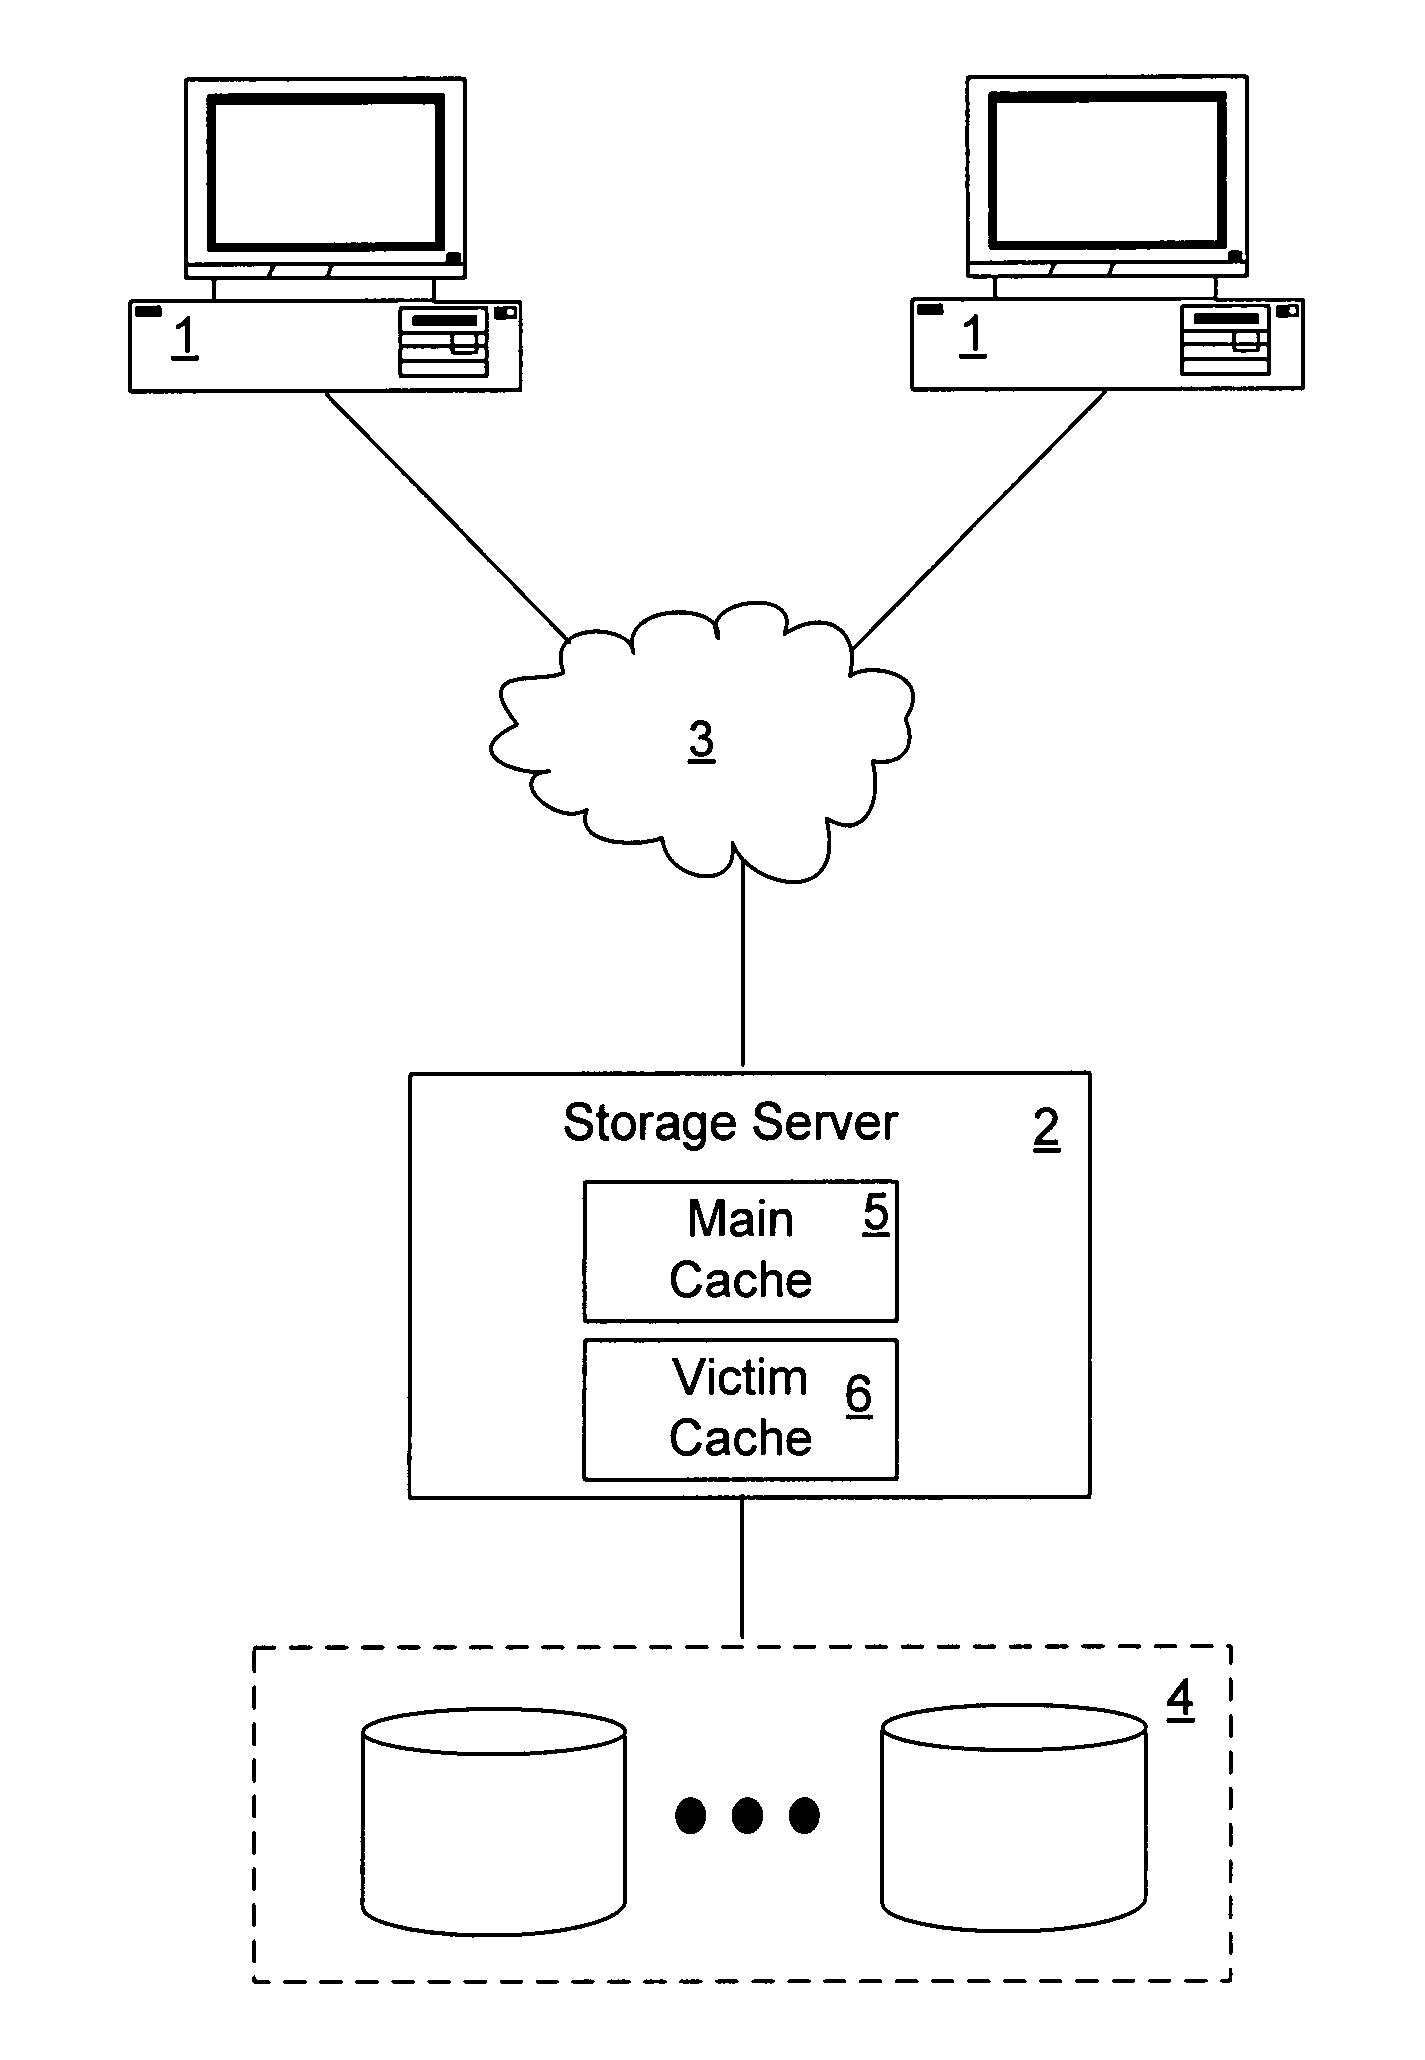 Partial tag offloading for storage server victim cache